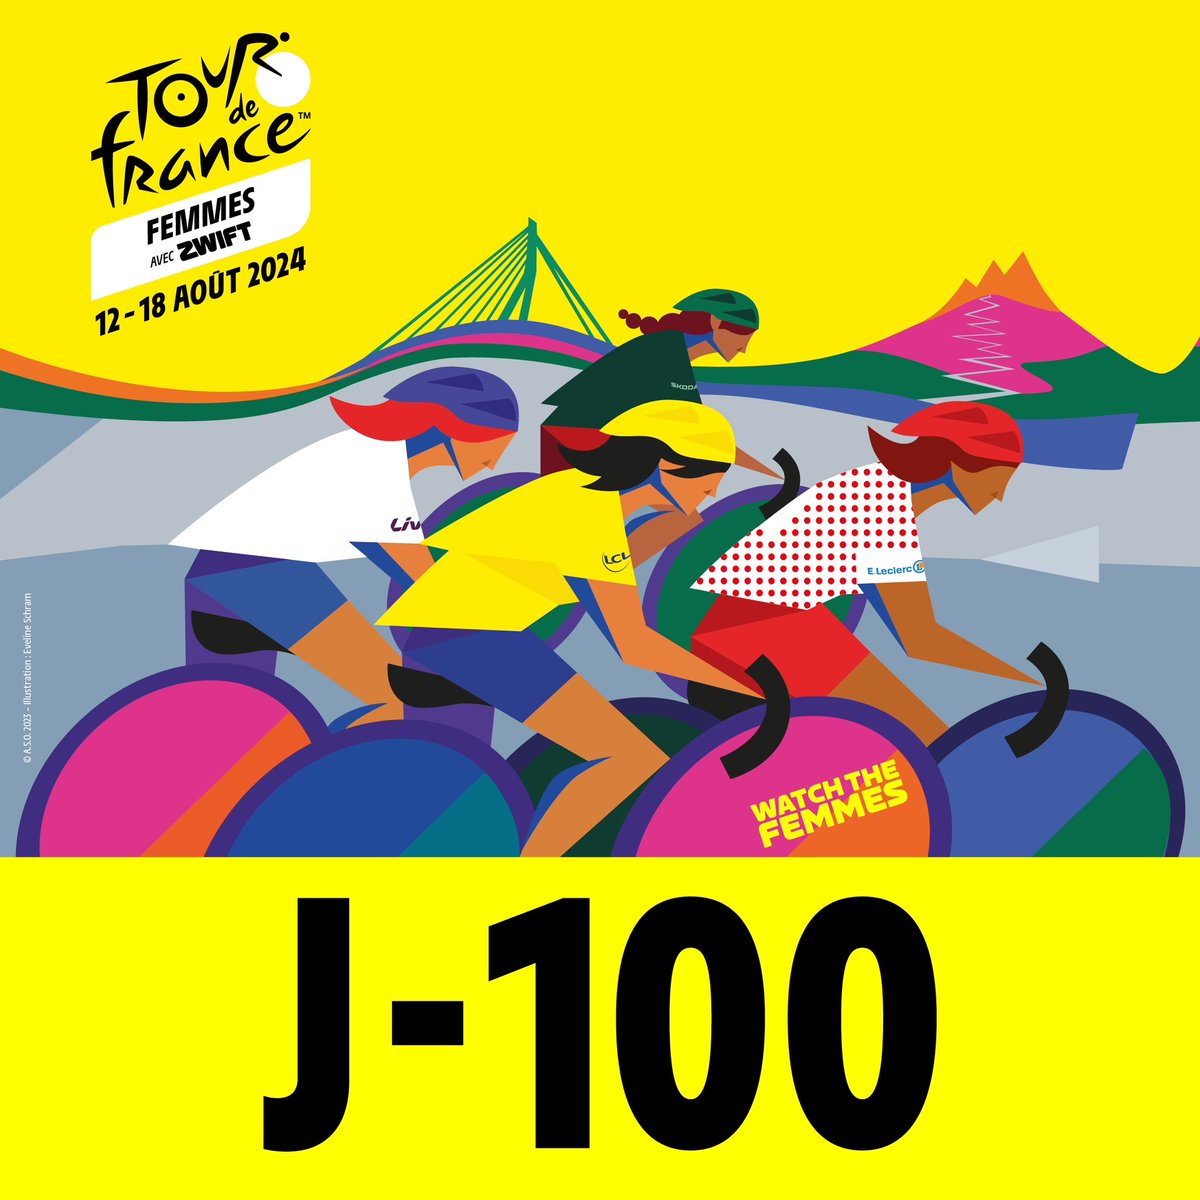 🔥🔥🔥 The #TDFF2024 avec @GoZwift will start in exactly 100 days! We just can’t wait! 🤩🤩🤩 🔥🔥🔥 Le #TDFF2024 avec @GoZwift, c’est dans exactement 100 jours ! On a tellement hâte ! 🤩🤩🤩 👋 See you soon @TDFFRotterdam! #WatchTheFemmes